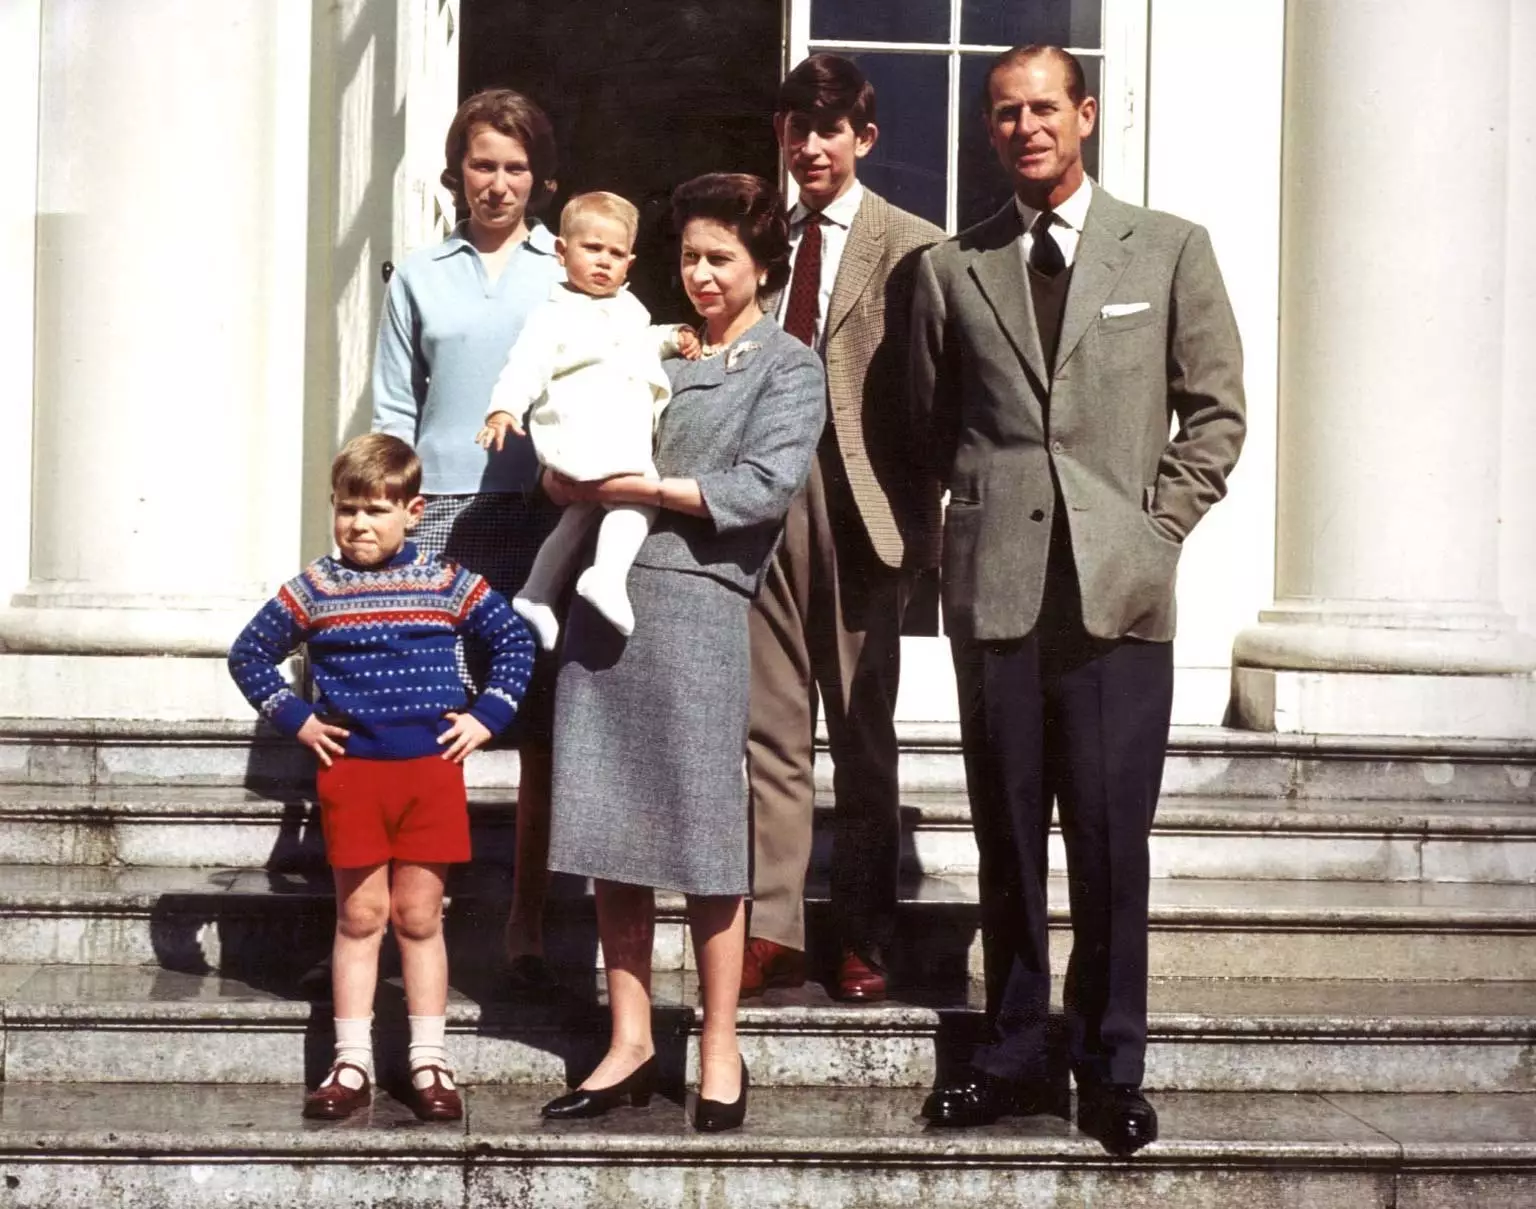 The Queen (centre) with her family Prince Andrew, Princess Anne, Prince Edward, the Prince of Wales and the Duke of Edinburgh on the Queen's 39th birthday (